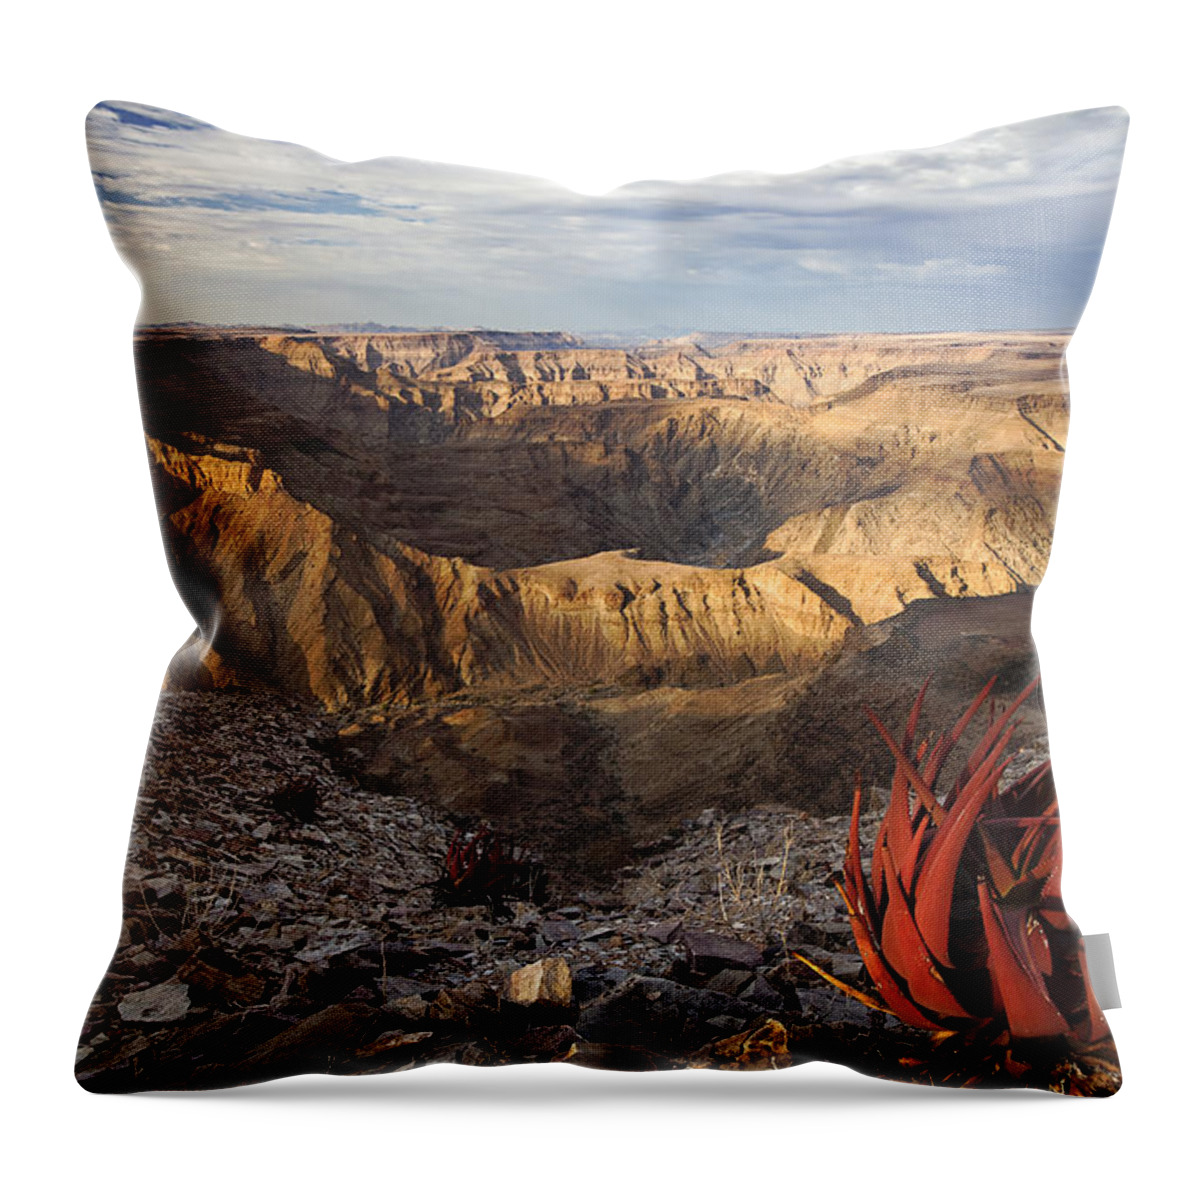 Vincent Grafhorst Throw Pillow featuring the photograph Desert And Fish River Canyon Namibia by Vincent Grafhorst